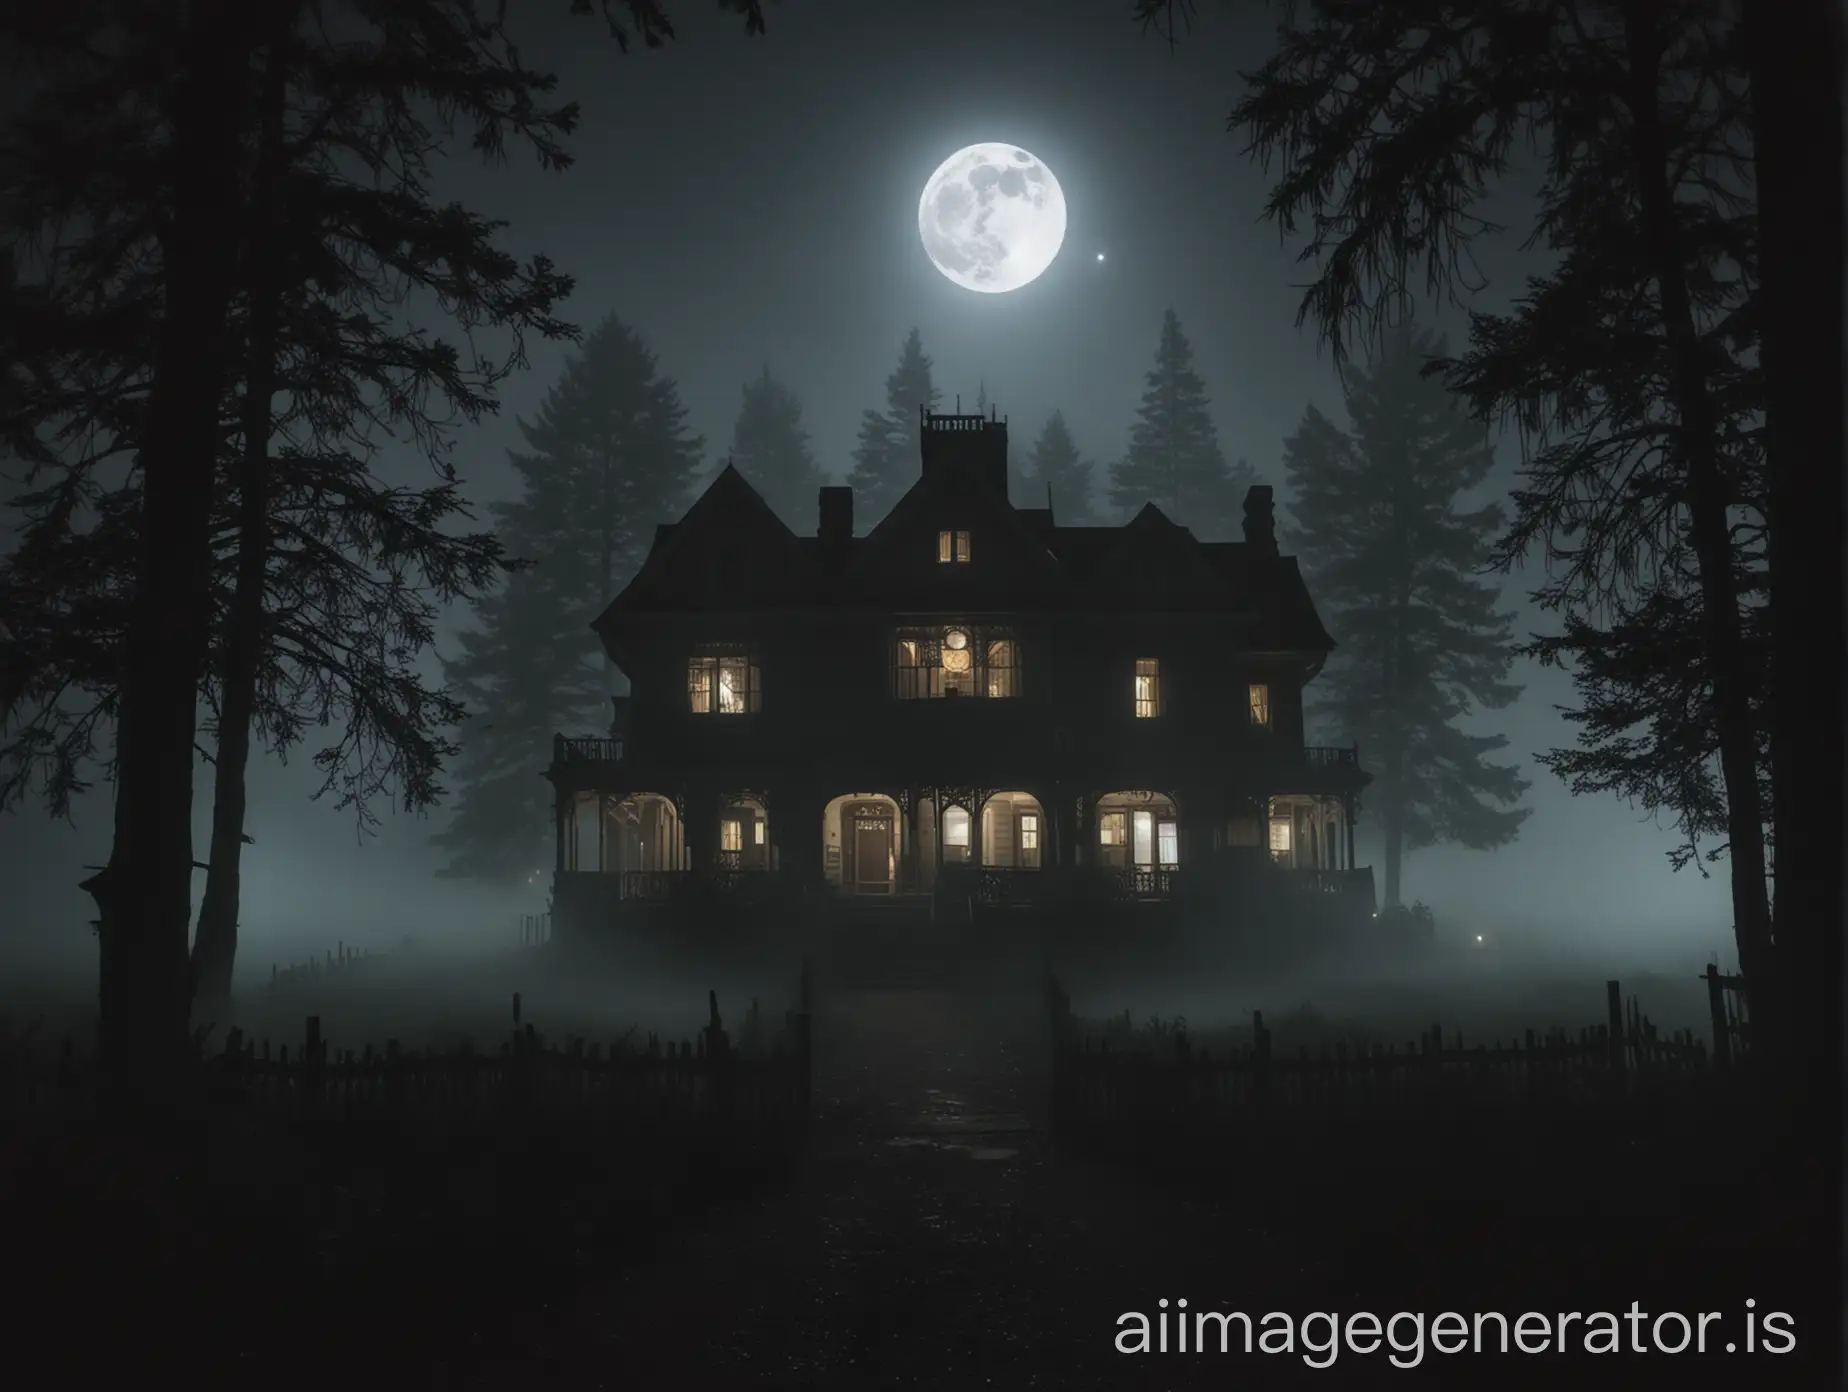 A dark, ominous image of Redwood Manor at night, with a full moon and fog surrounding it.